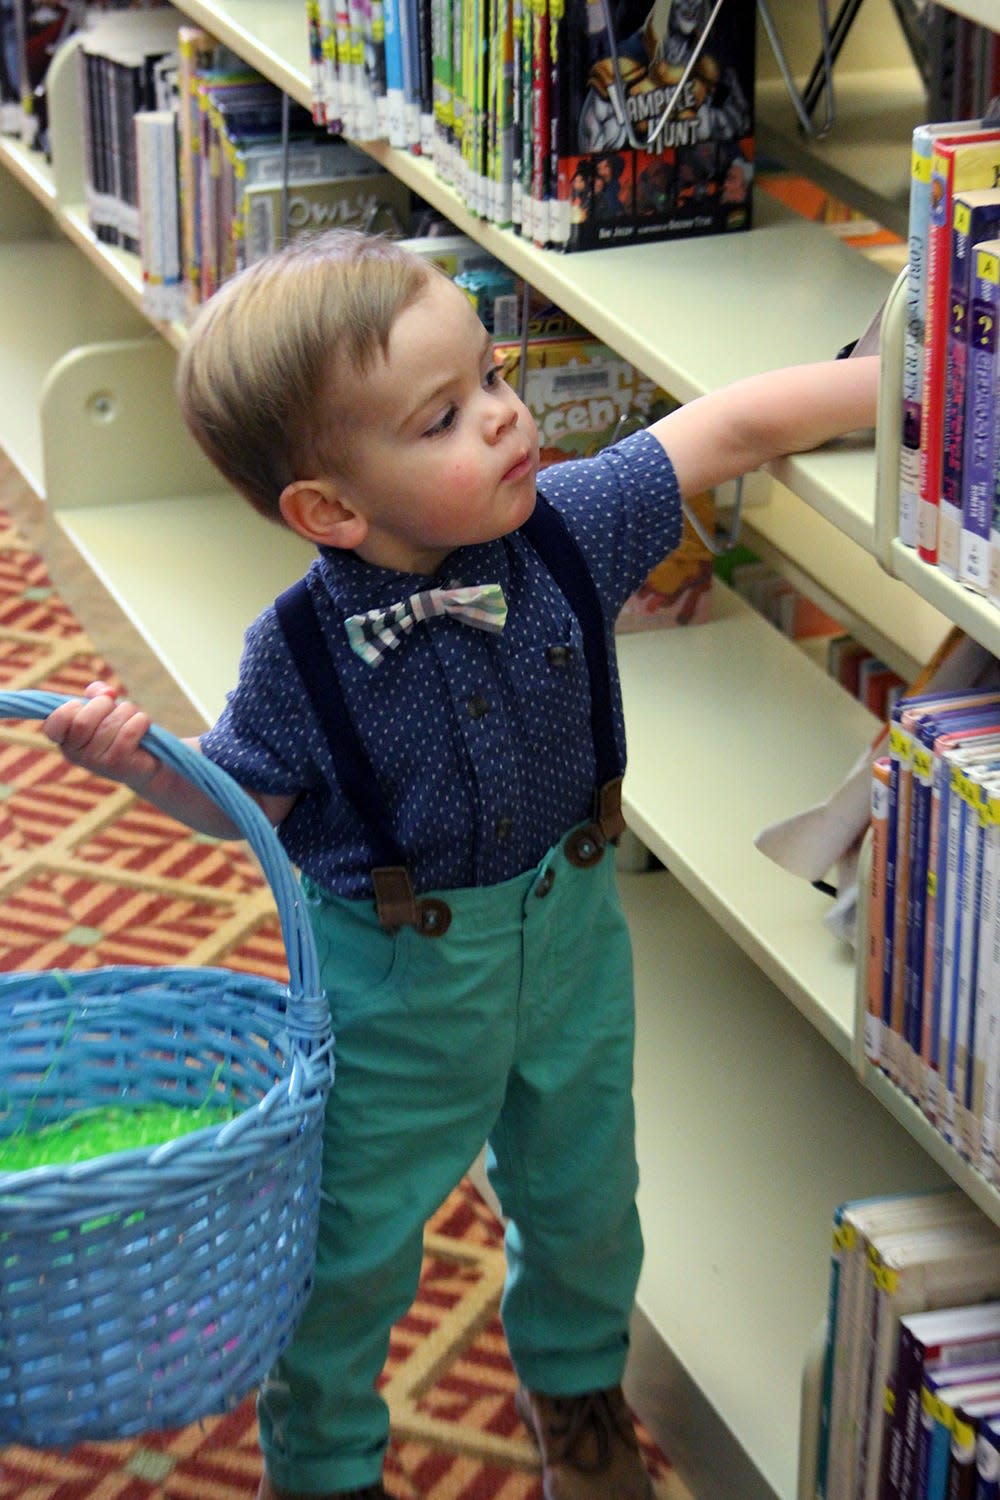 Cairo Coubey searches between the books at the Petoskey District Library for Easter eggs on March 31, 2021.